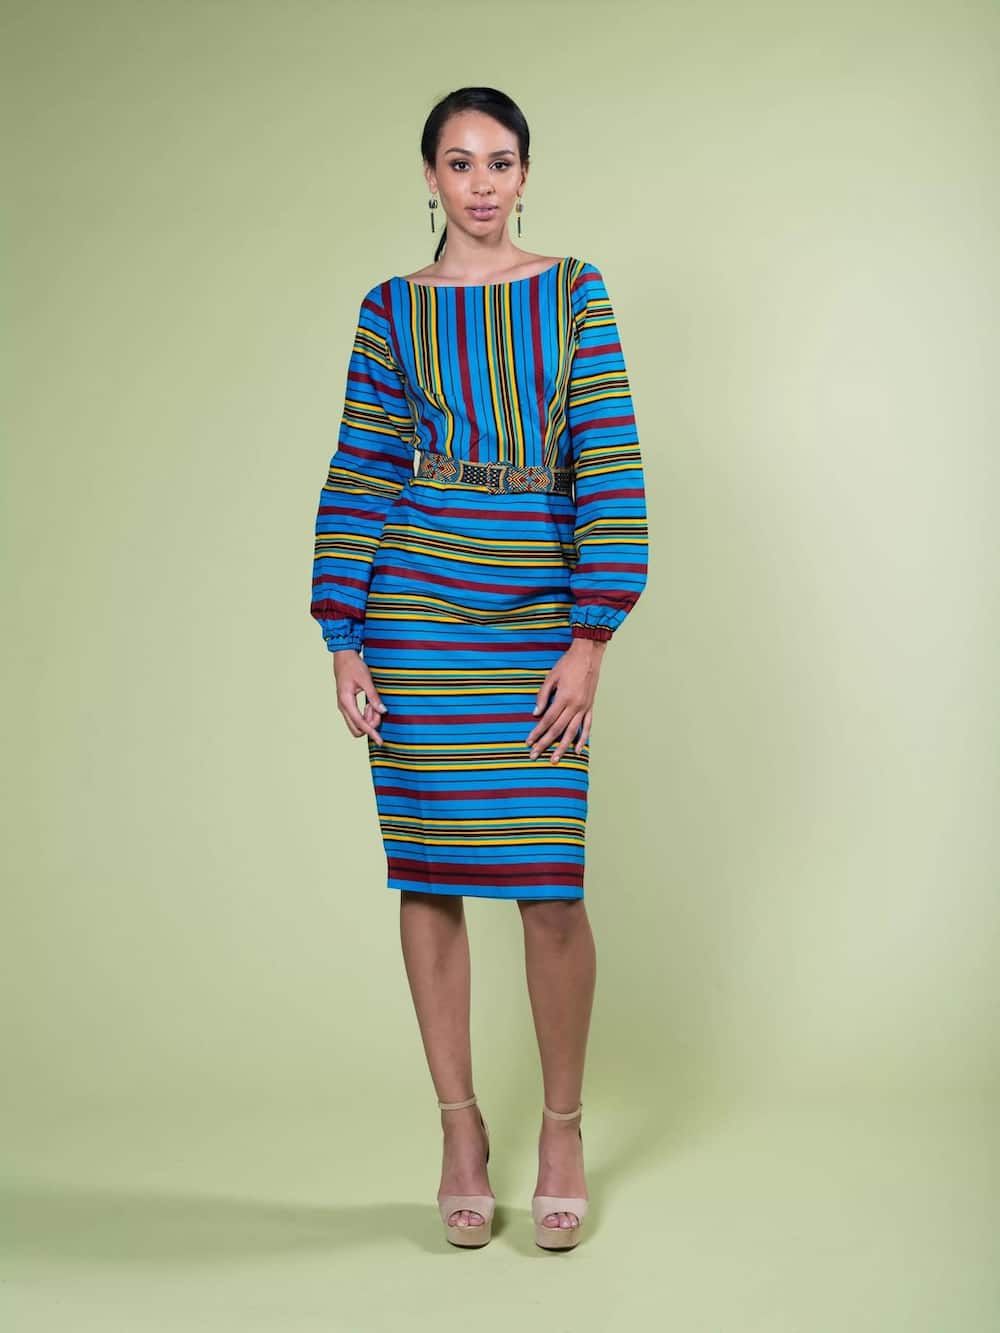 Fashionable african dresses for girls
african print dresses
african dresses design
modern african dresses